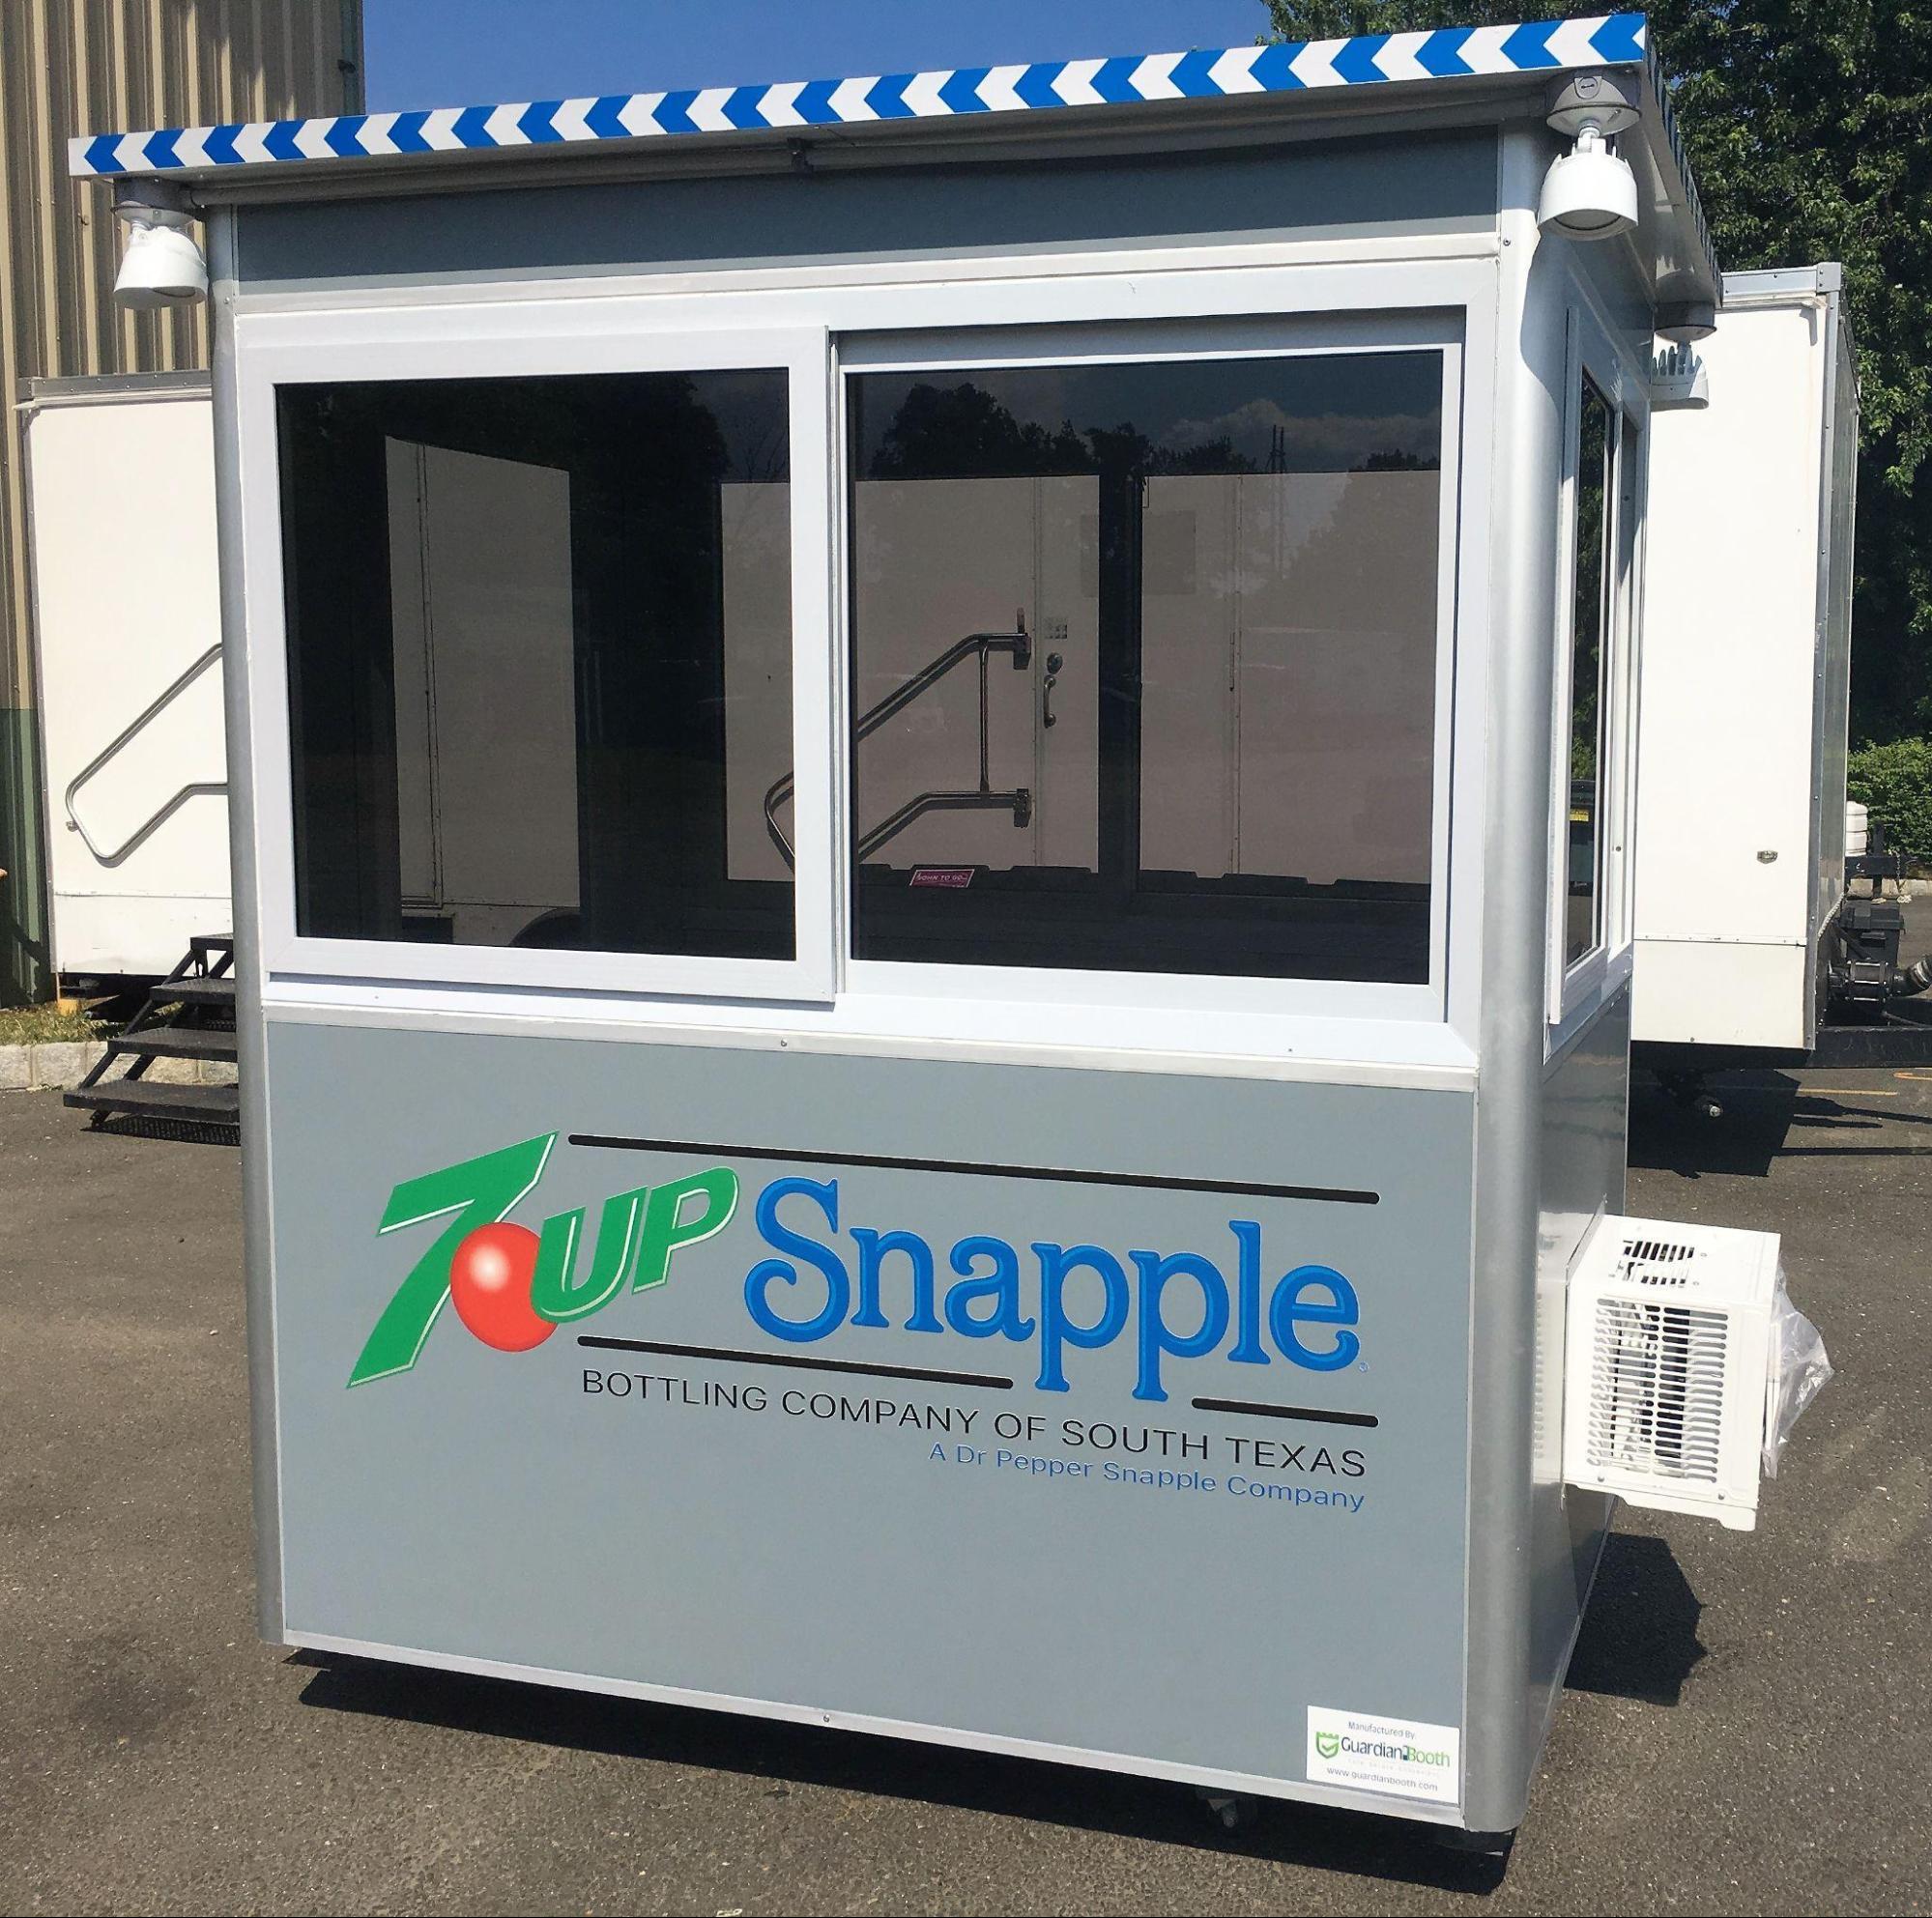 A grey prefabricated security guard booth branded with 7Up and Snapple logos